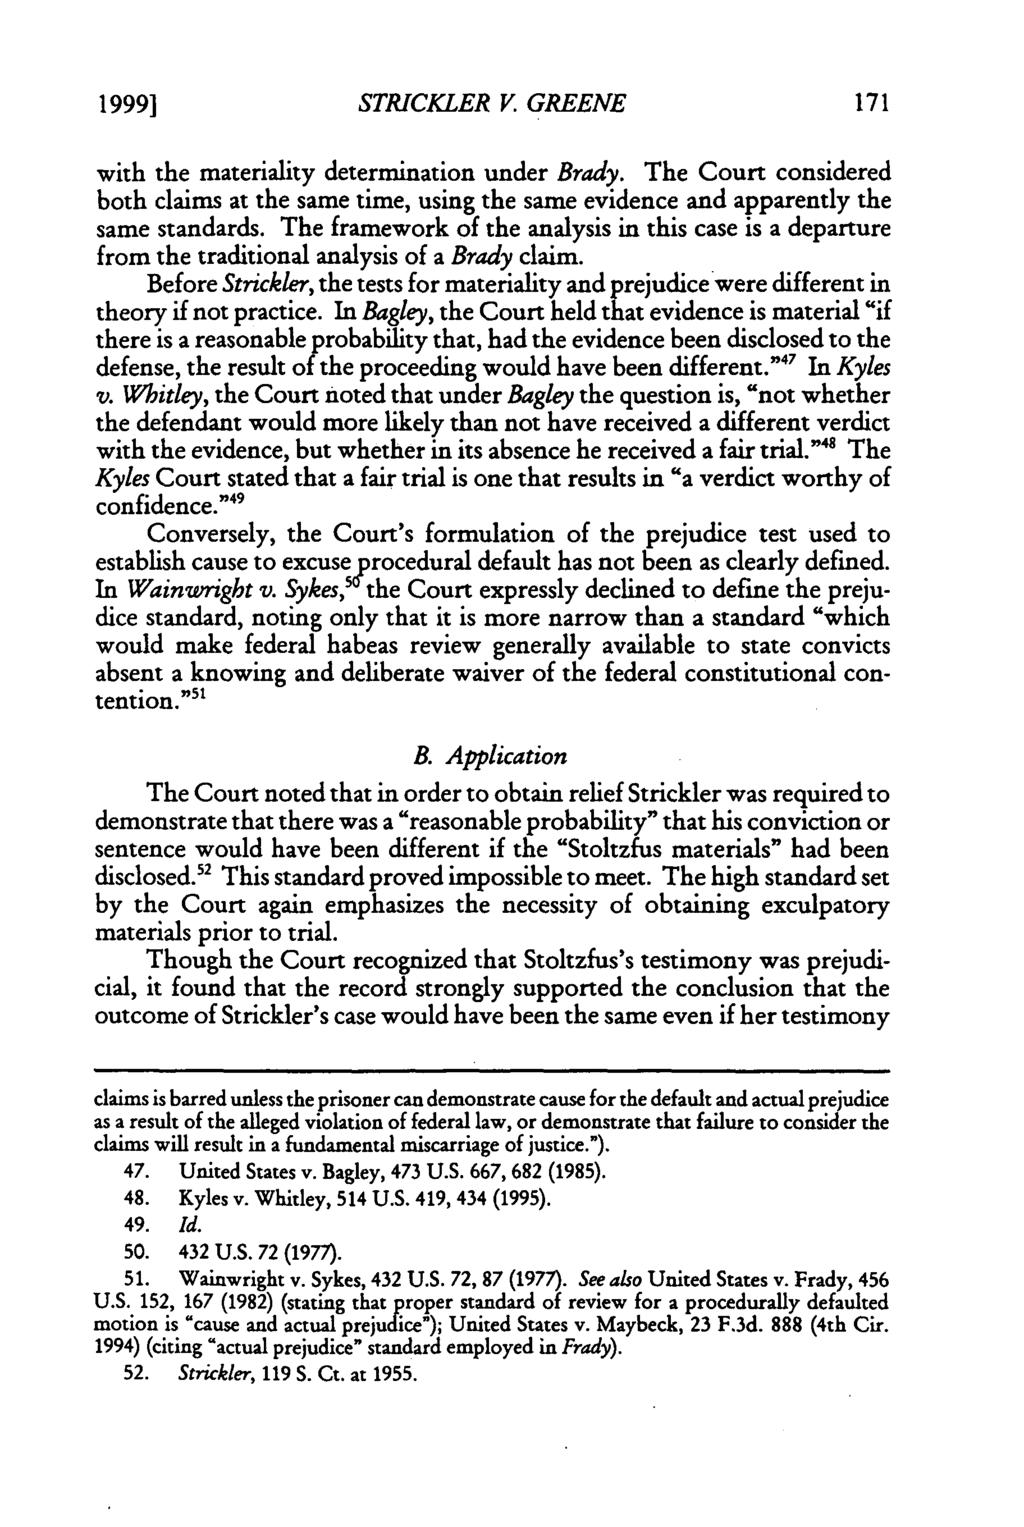 1999] STRICKLER V. GREENE with the materiality determination under Brady. The Court considered both claims at the same time, using the same evidence and apparently the same standards.